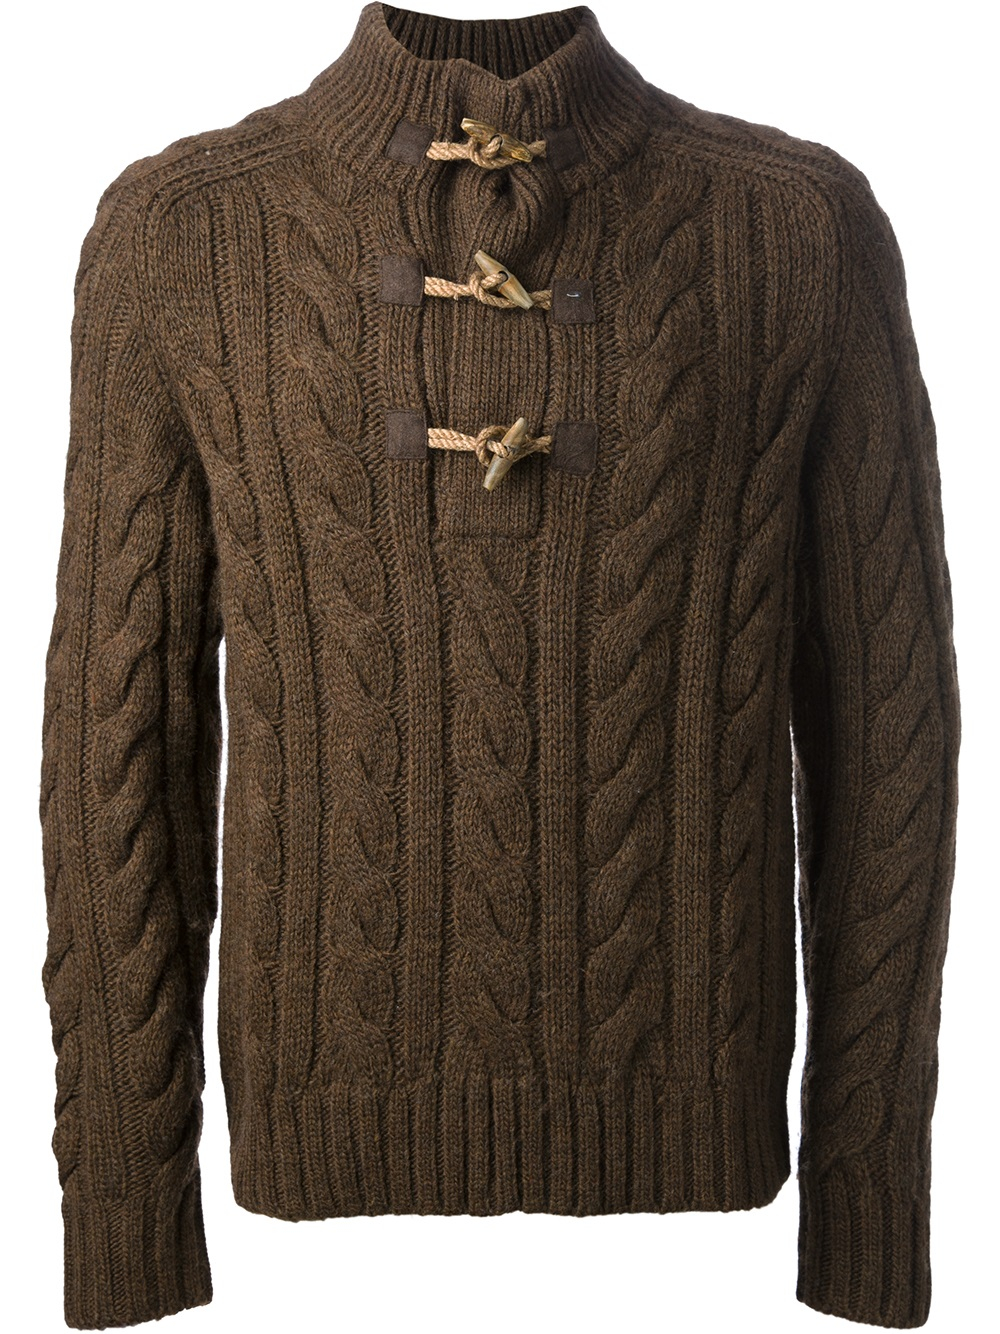 Polo Ralph Lauren Cable Knit Pullover Sweater in Brown for Men - Lyst